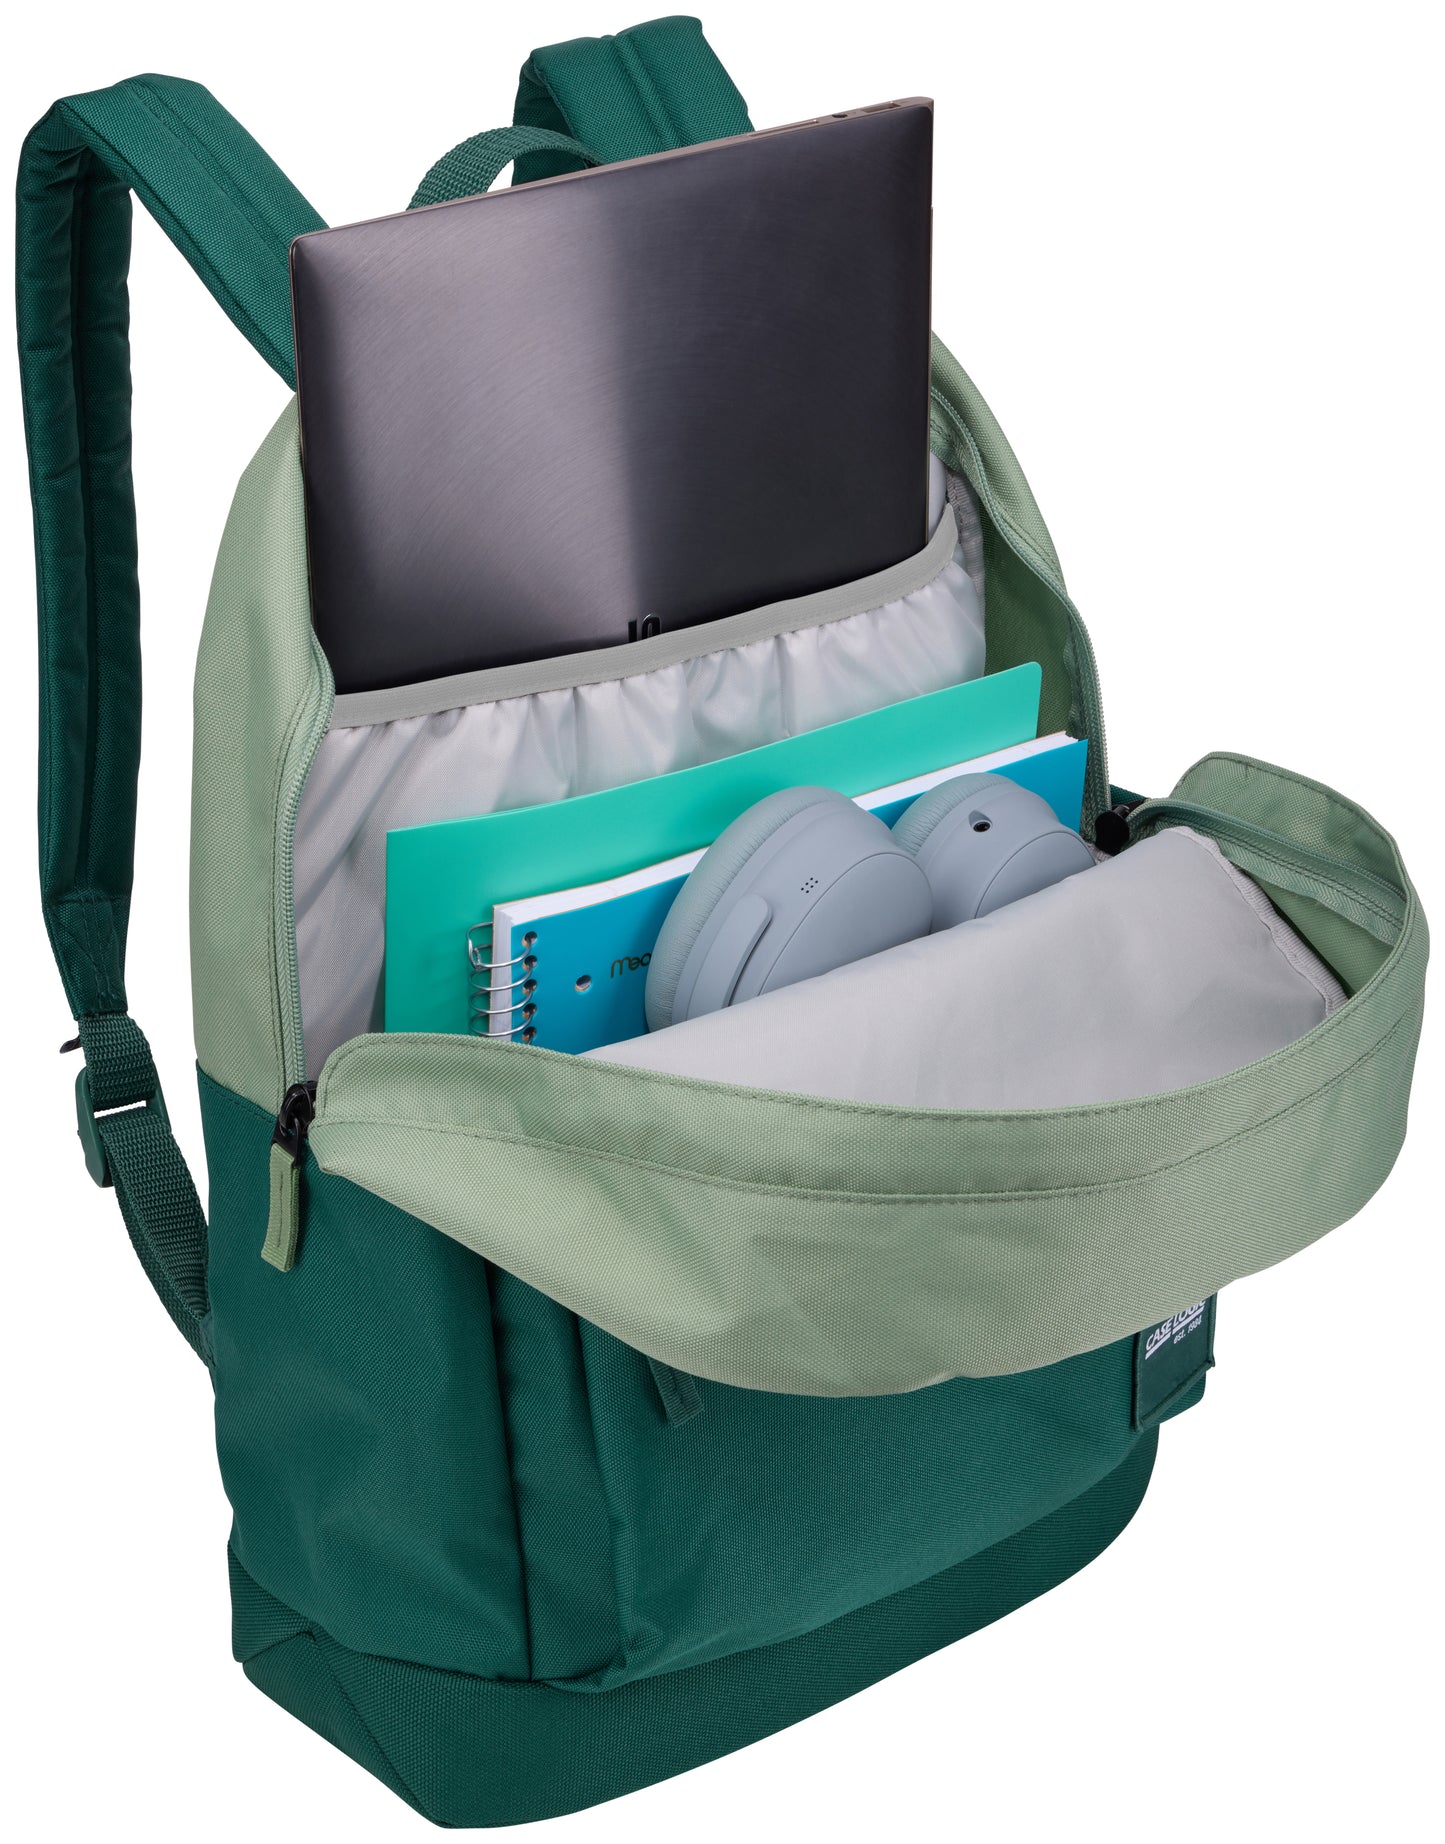 Campus 24L backpack for laptops up to 15.6" Case Logic CCAM-1216 Islay Green/Smoke Pine